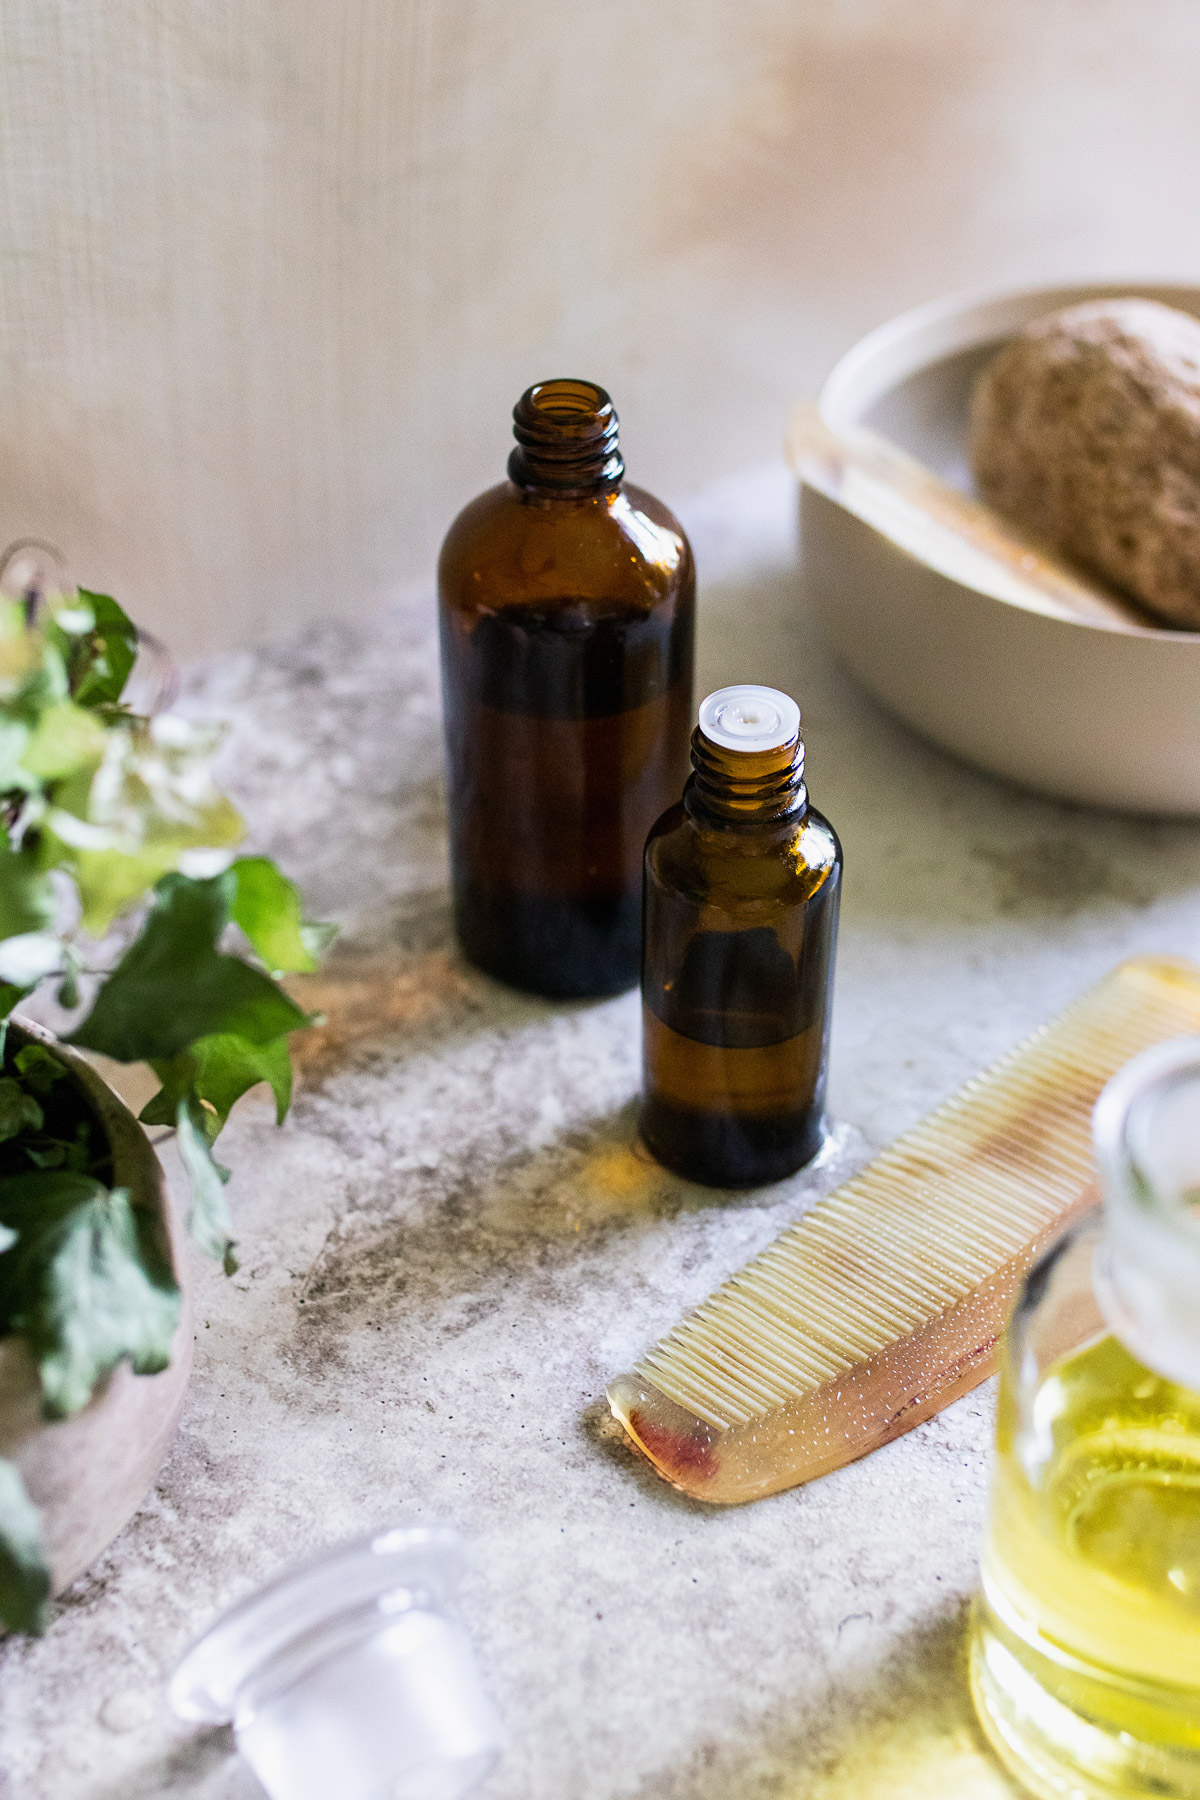 How to use tea tree oil for hair and scalp health